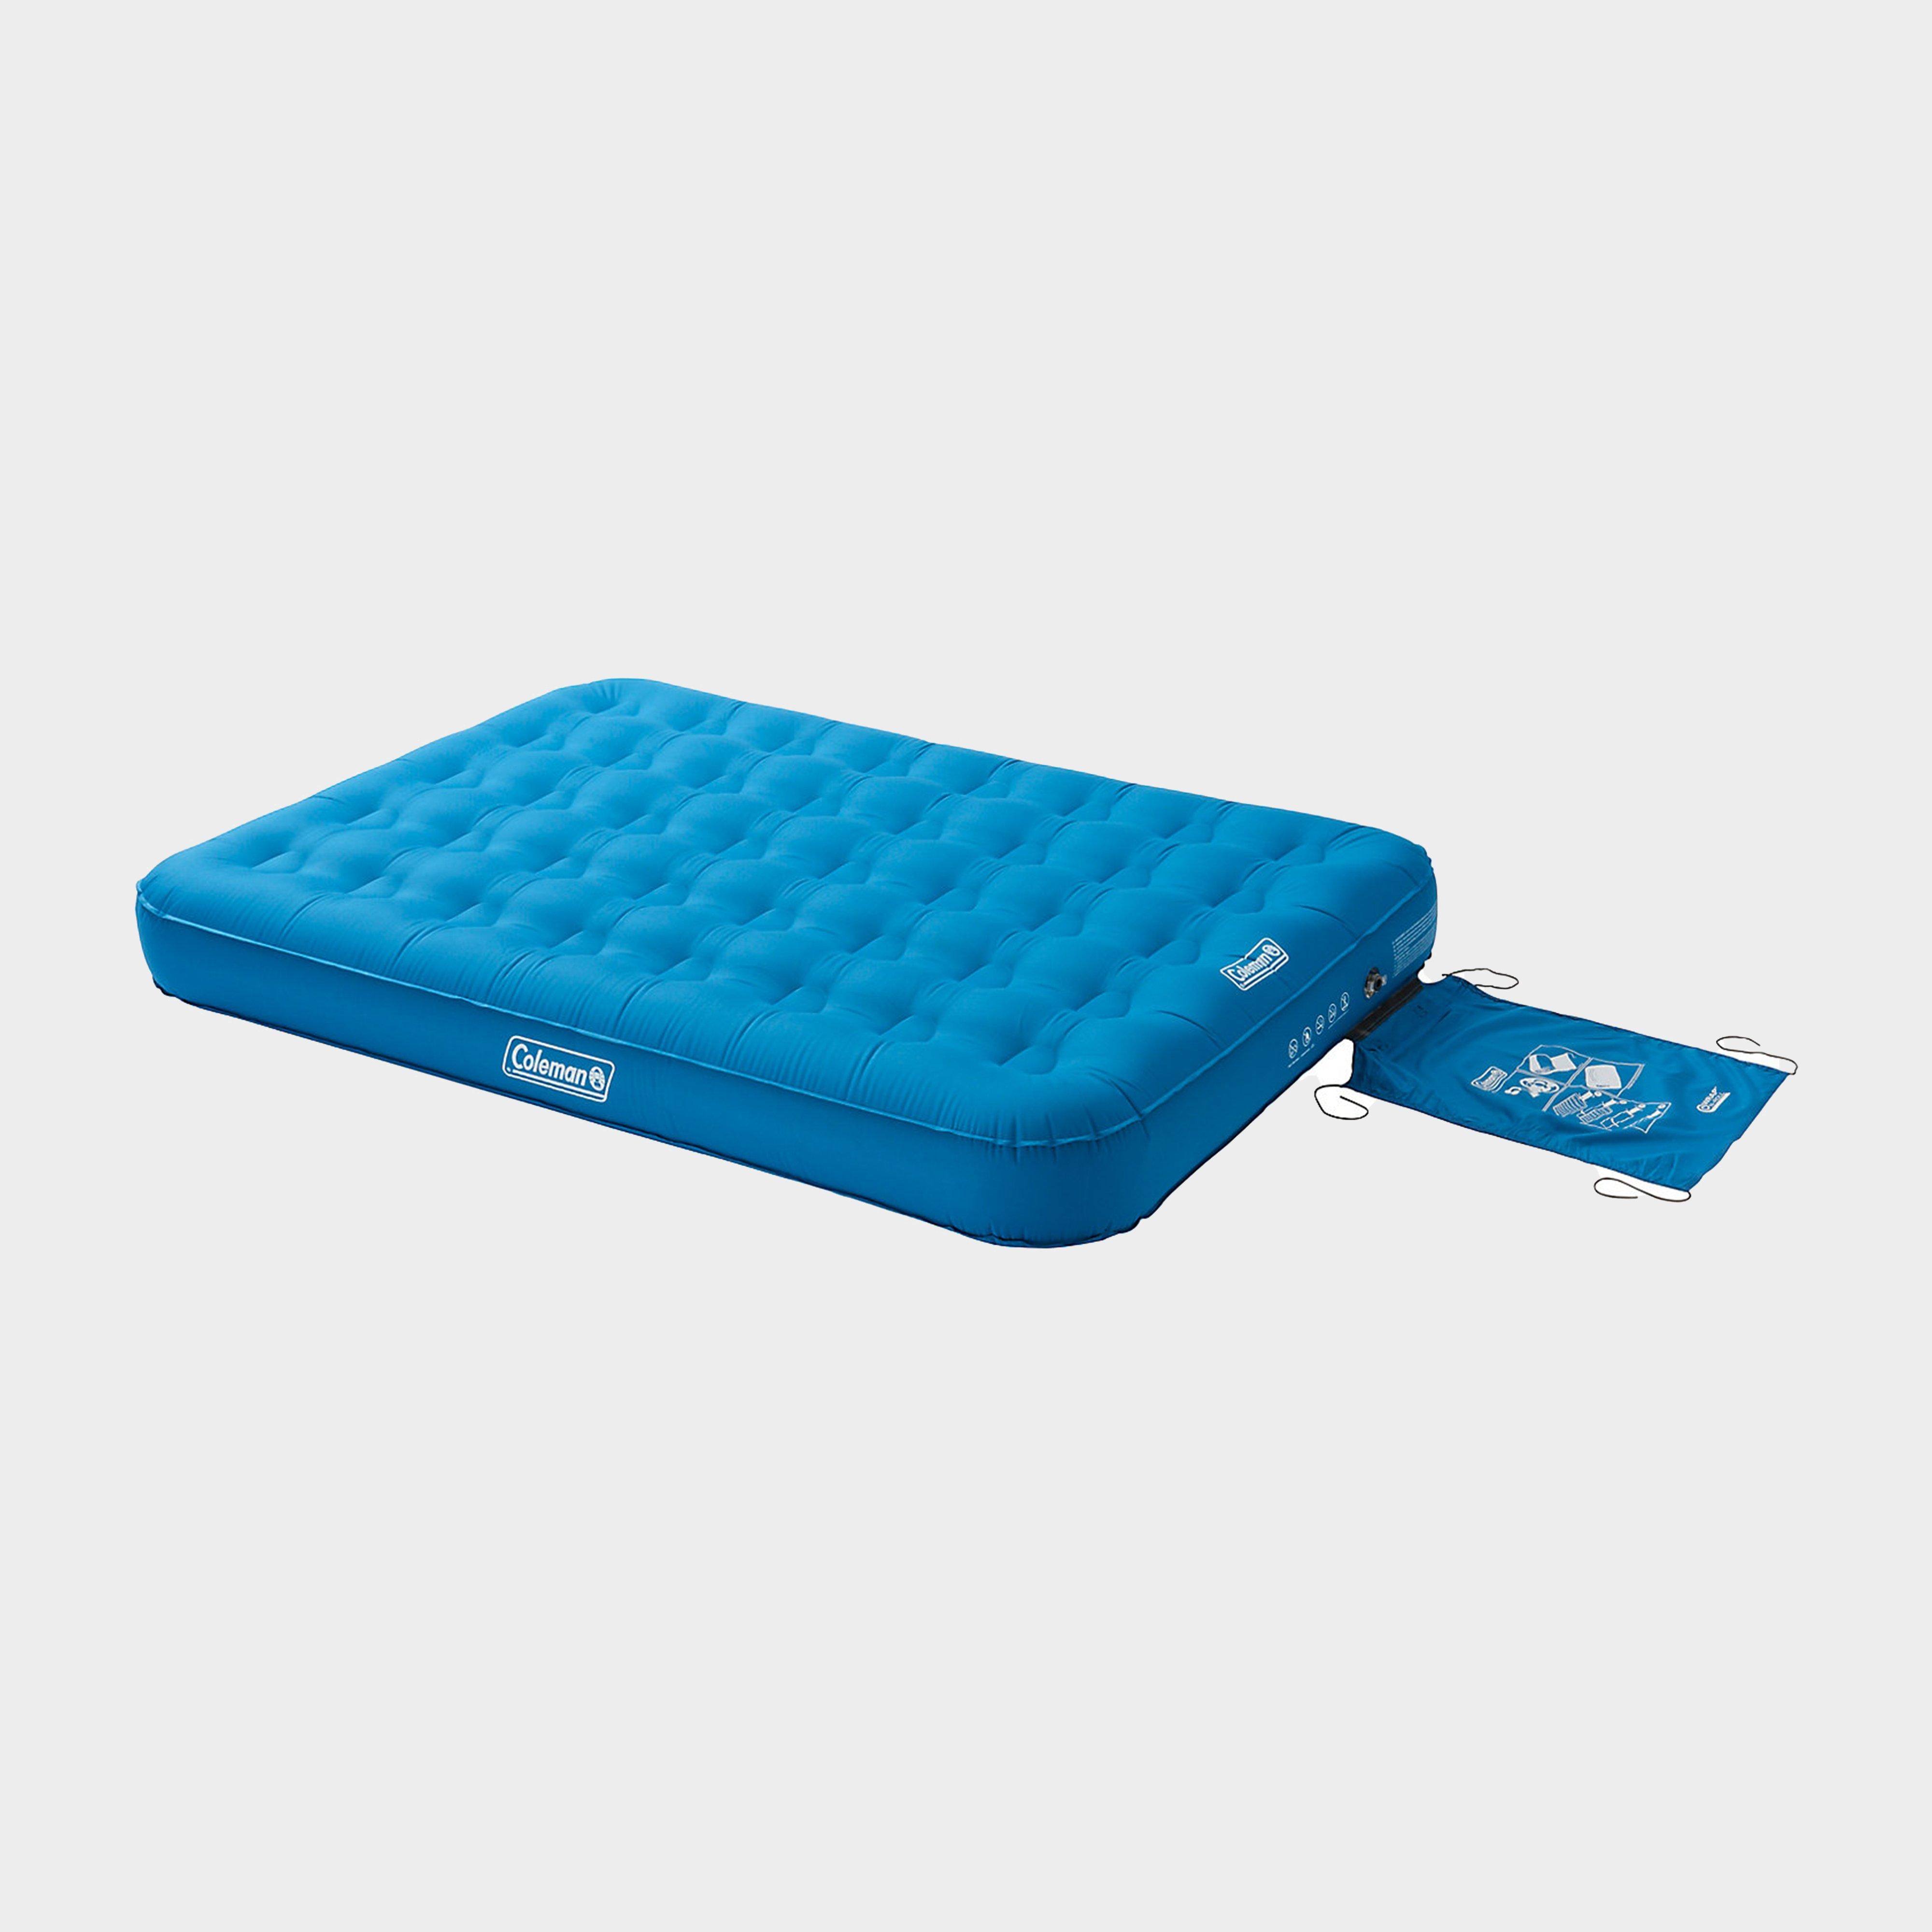 Coleman Coleman Extra Durable Double Airbed - Blue, Blue